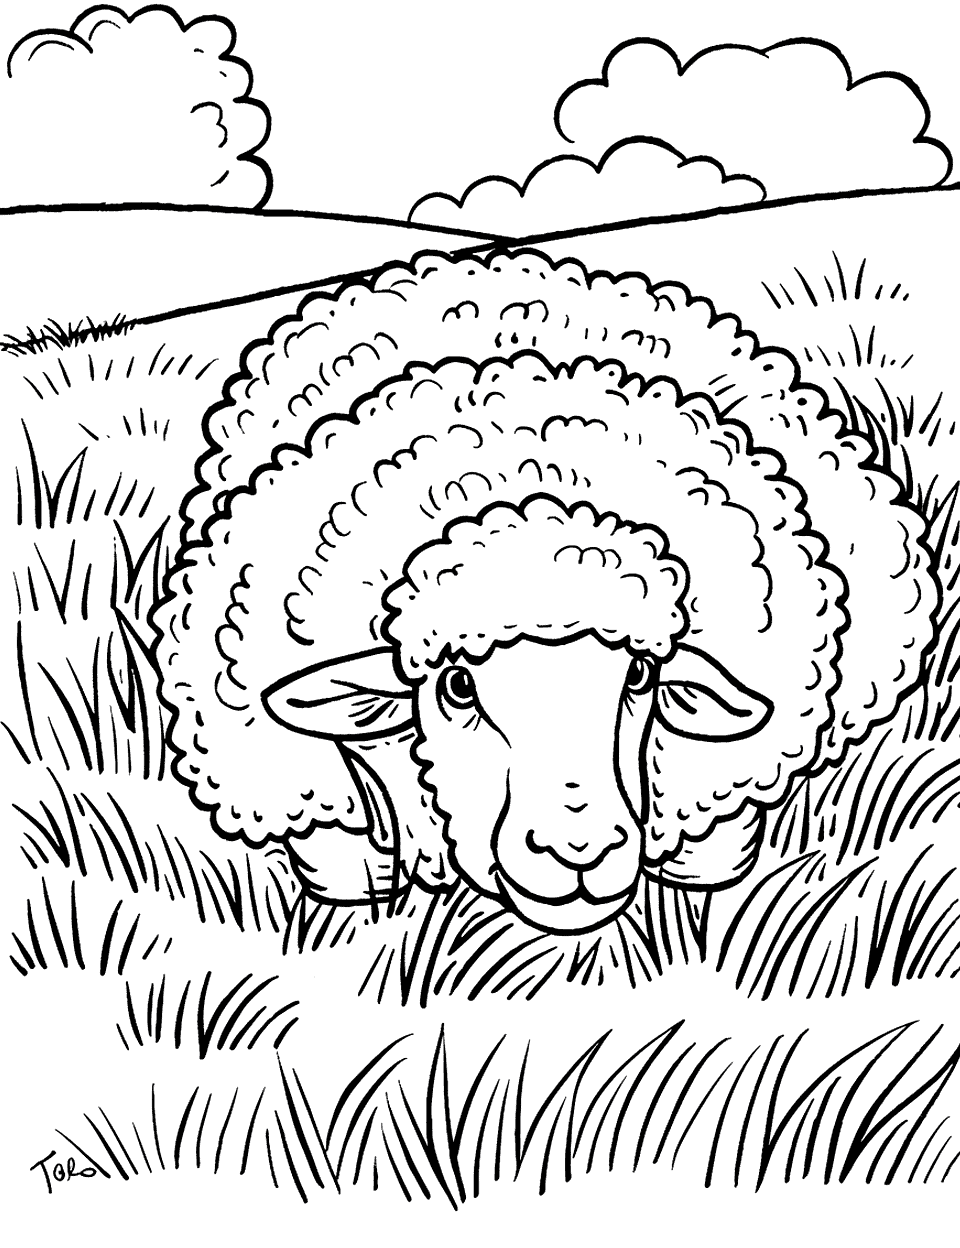 Texel Sheep at Rest Coloring Page - A Texel sheep lying down after chewing on some grass in a peaceful farm setting.